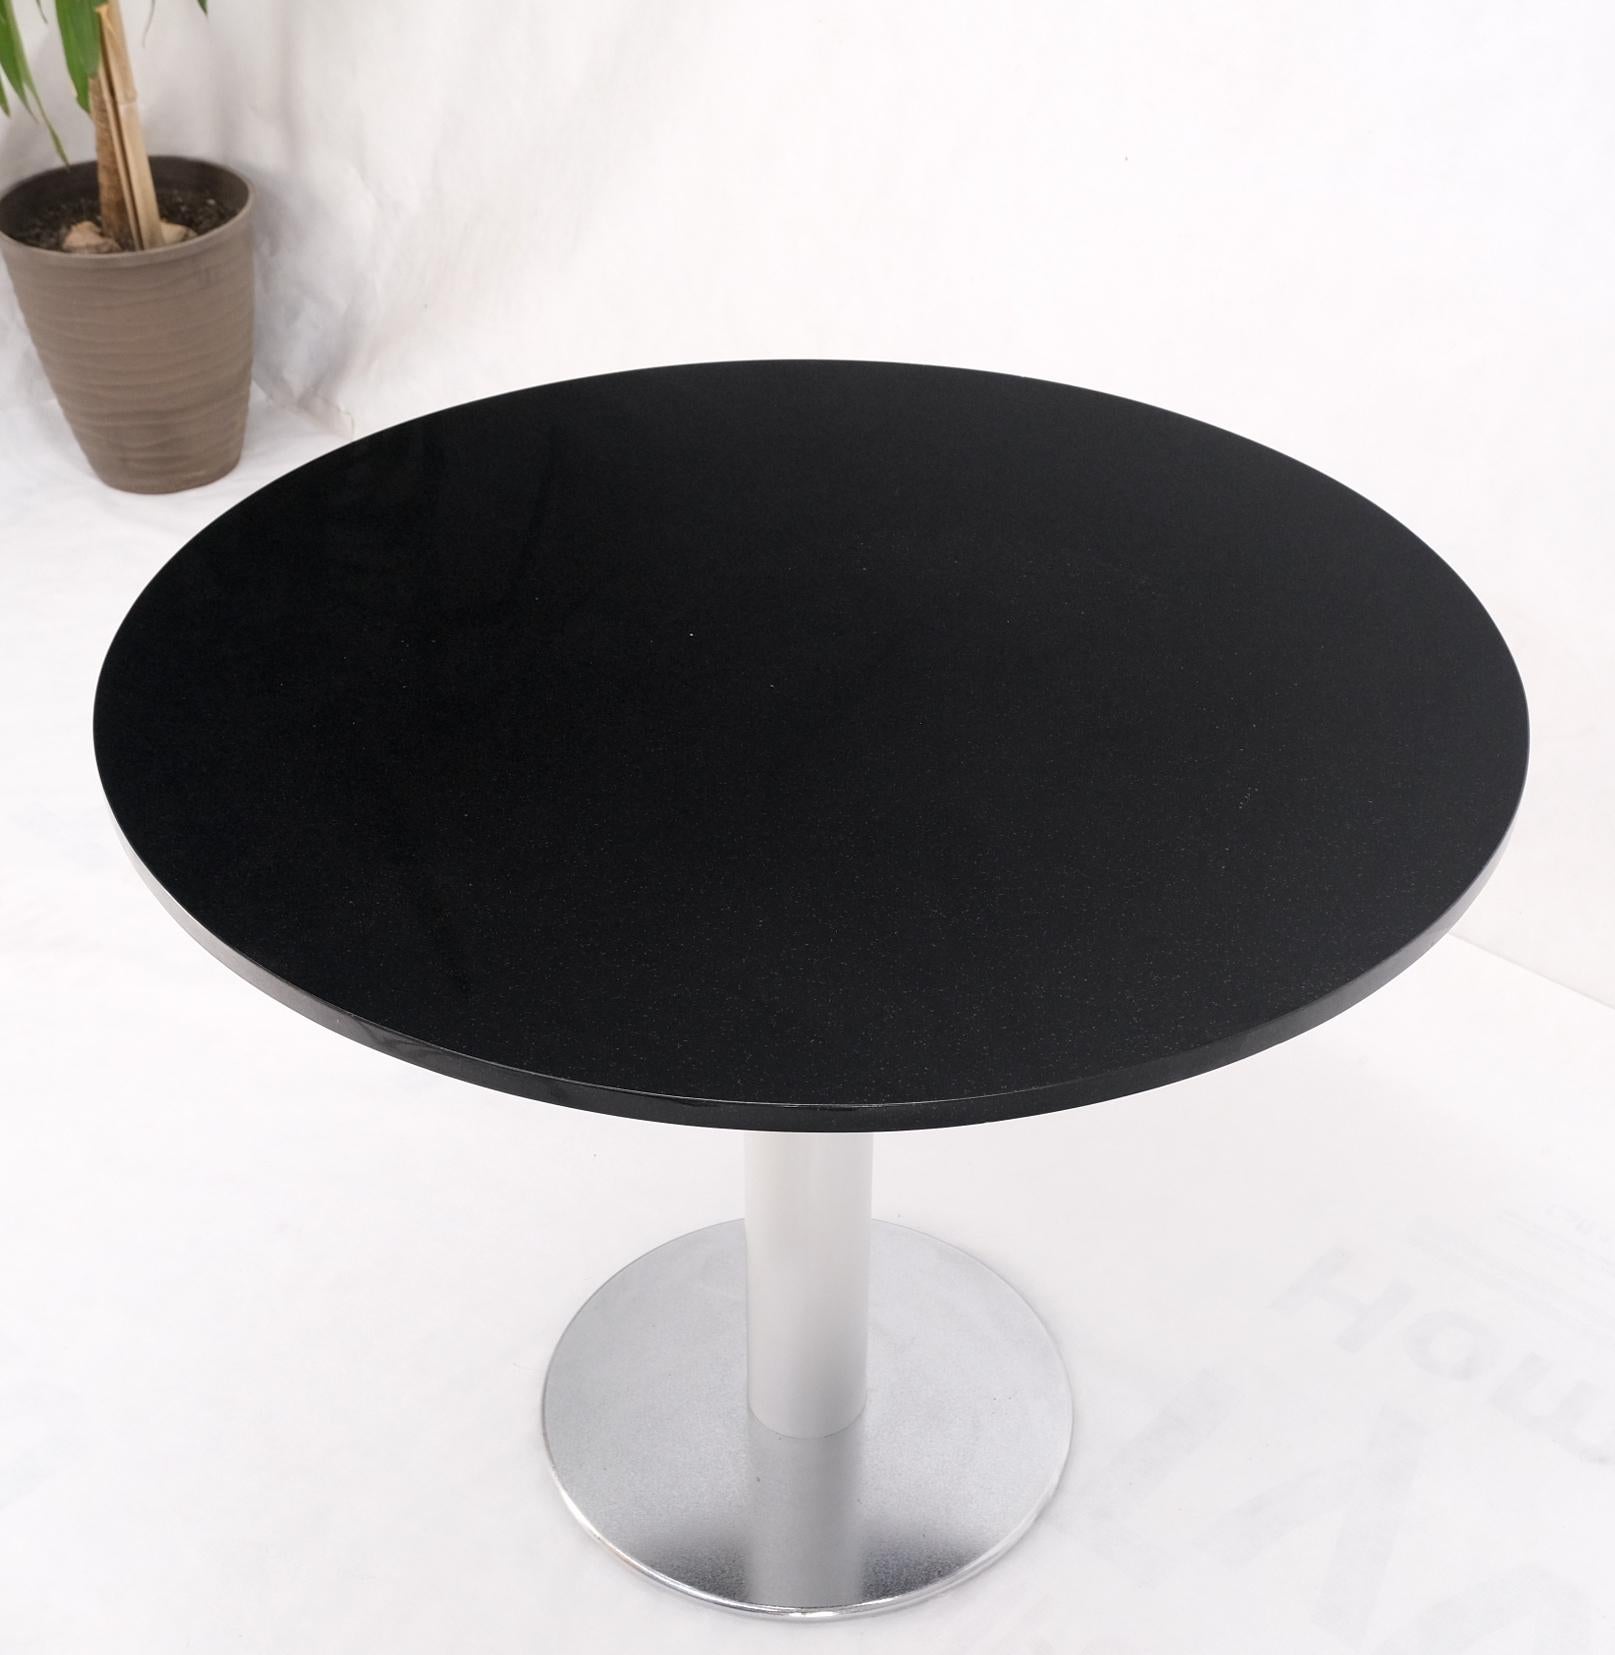 Black Granite Top Crome Pedestal Base Round Dining Table Mid Century Modern MINT For Sale 5